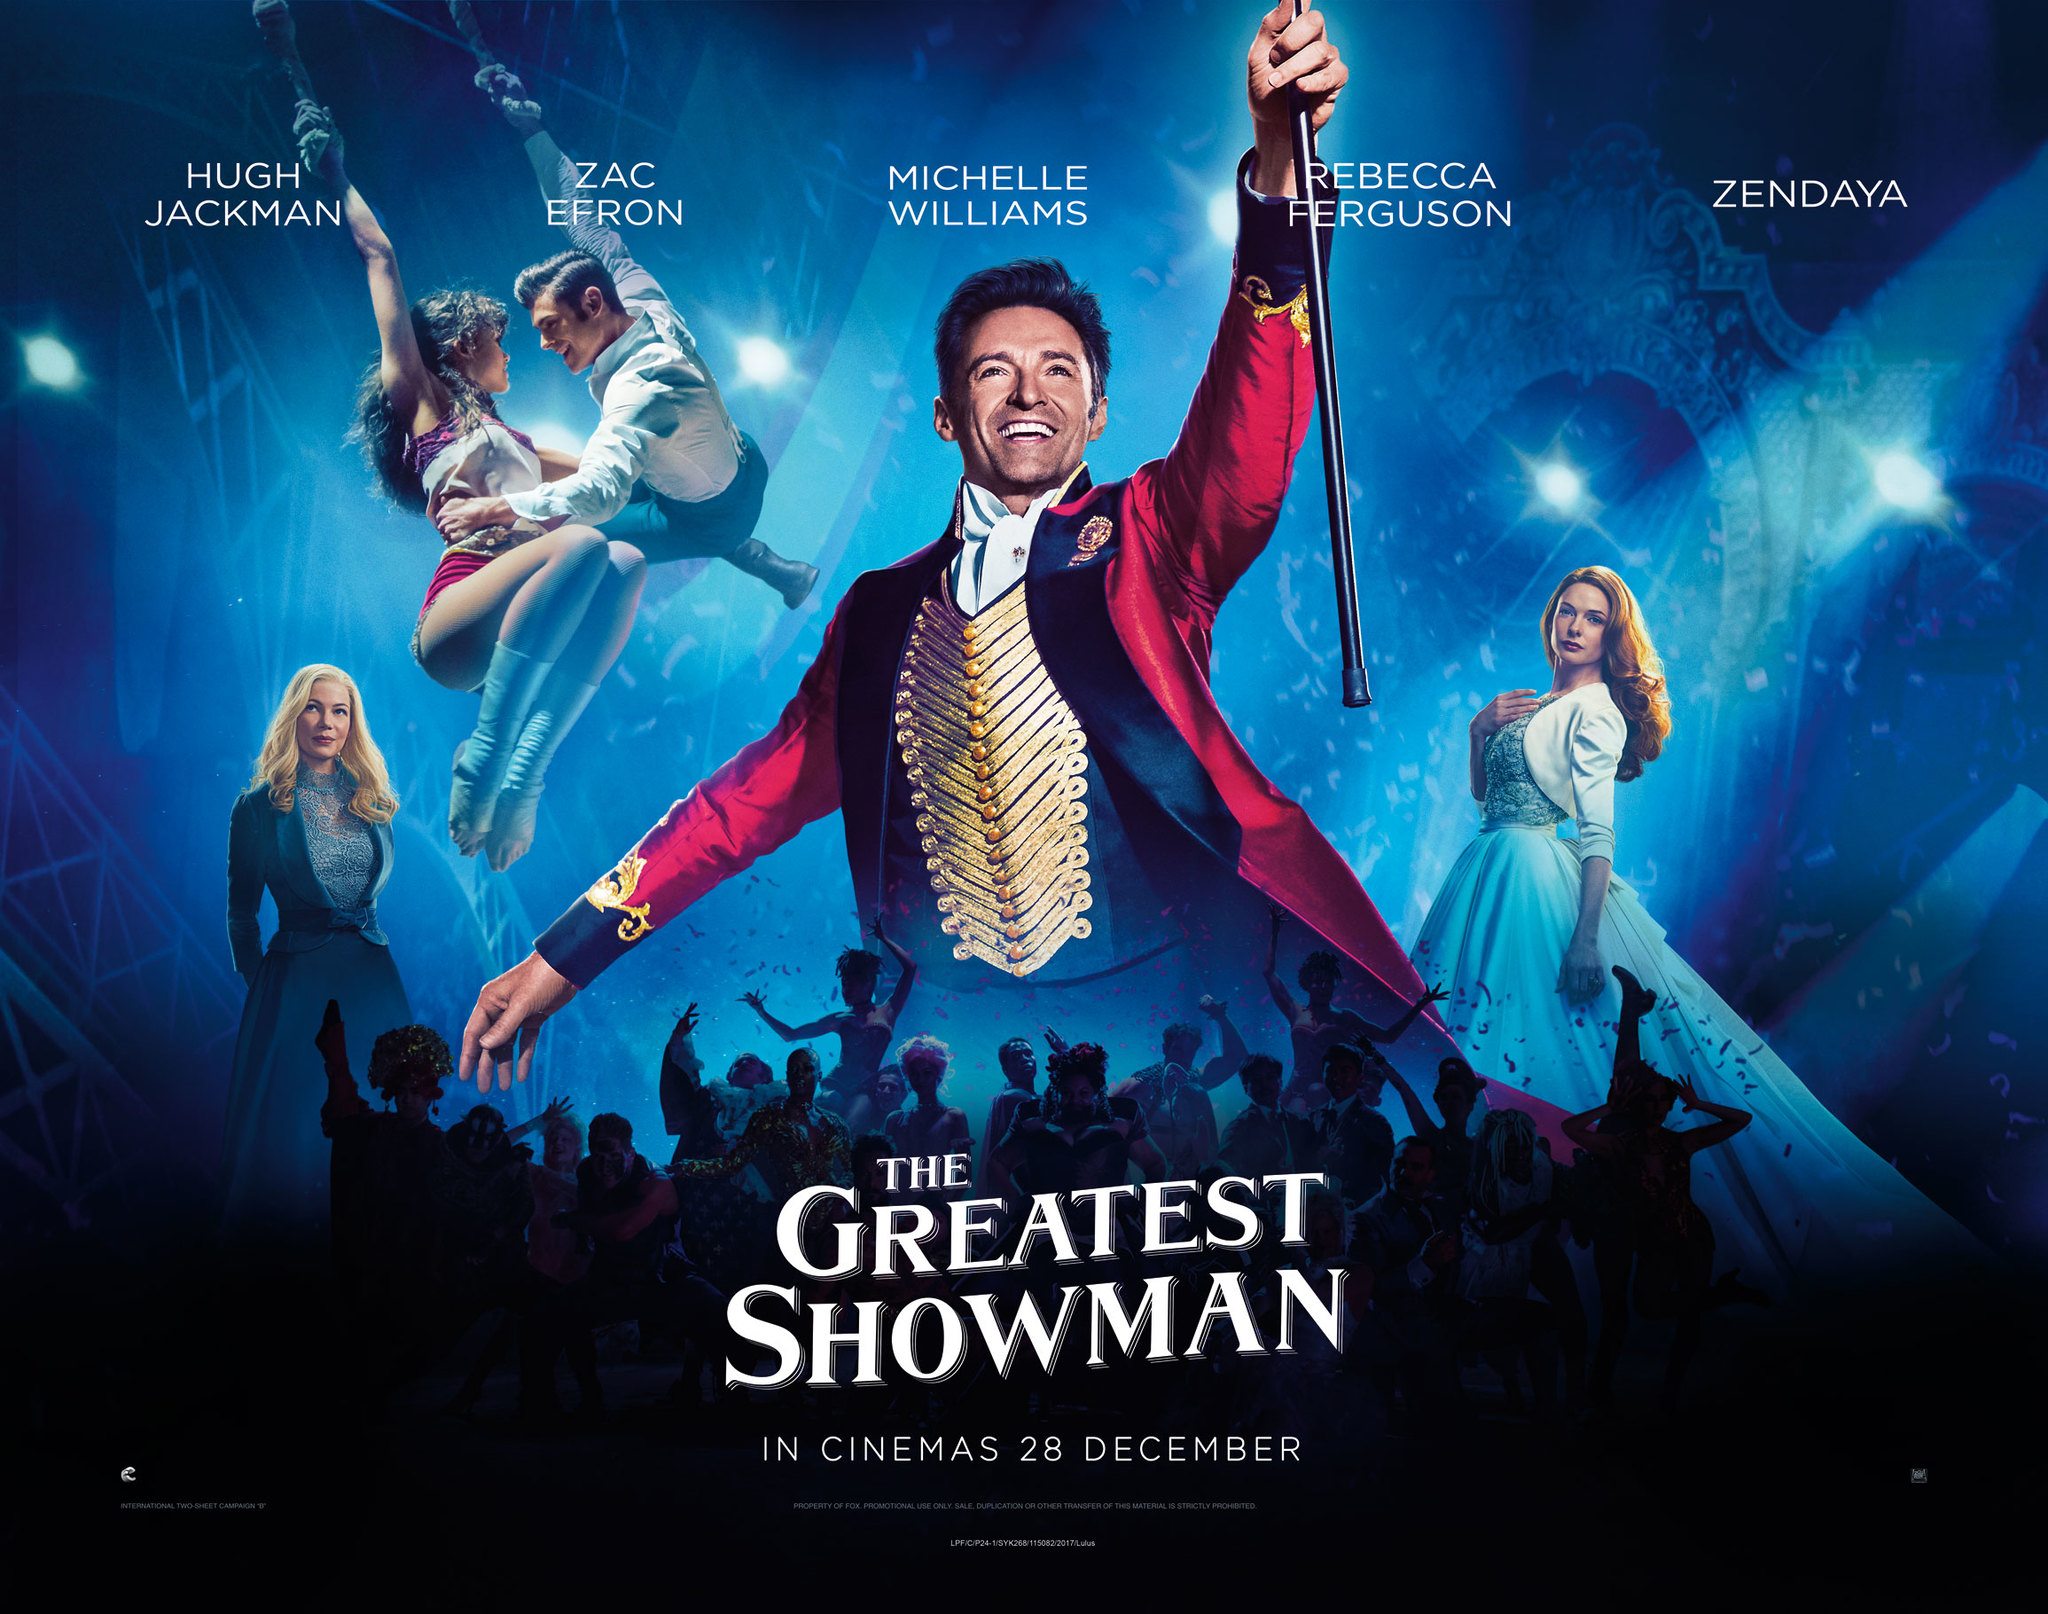 Is “The Greatest Showman” the Greatest Startup Movie?